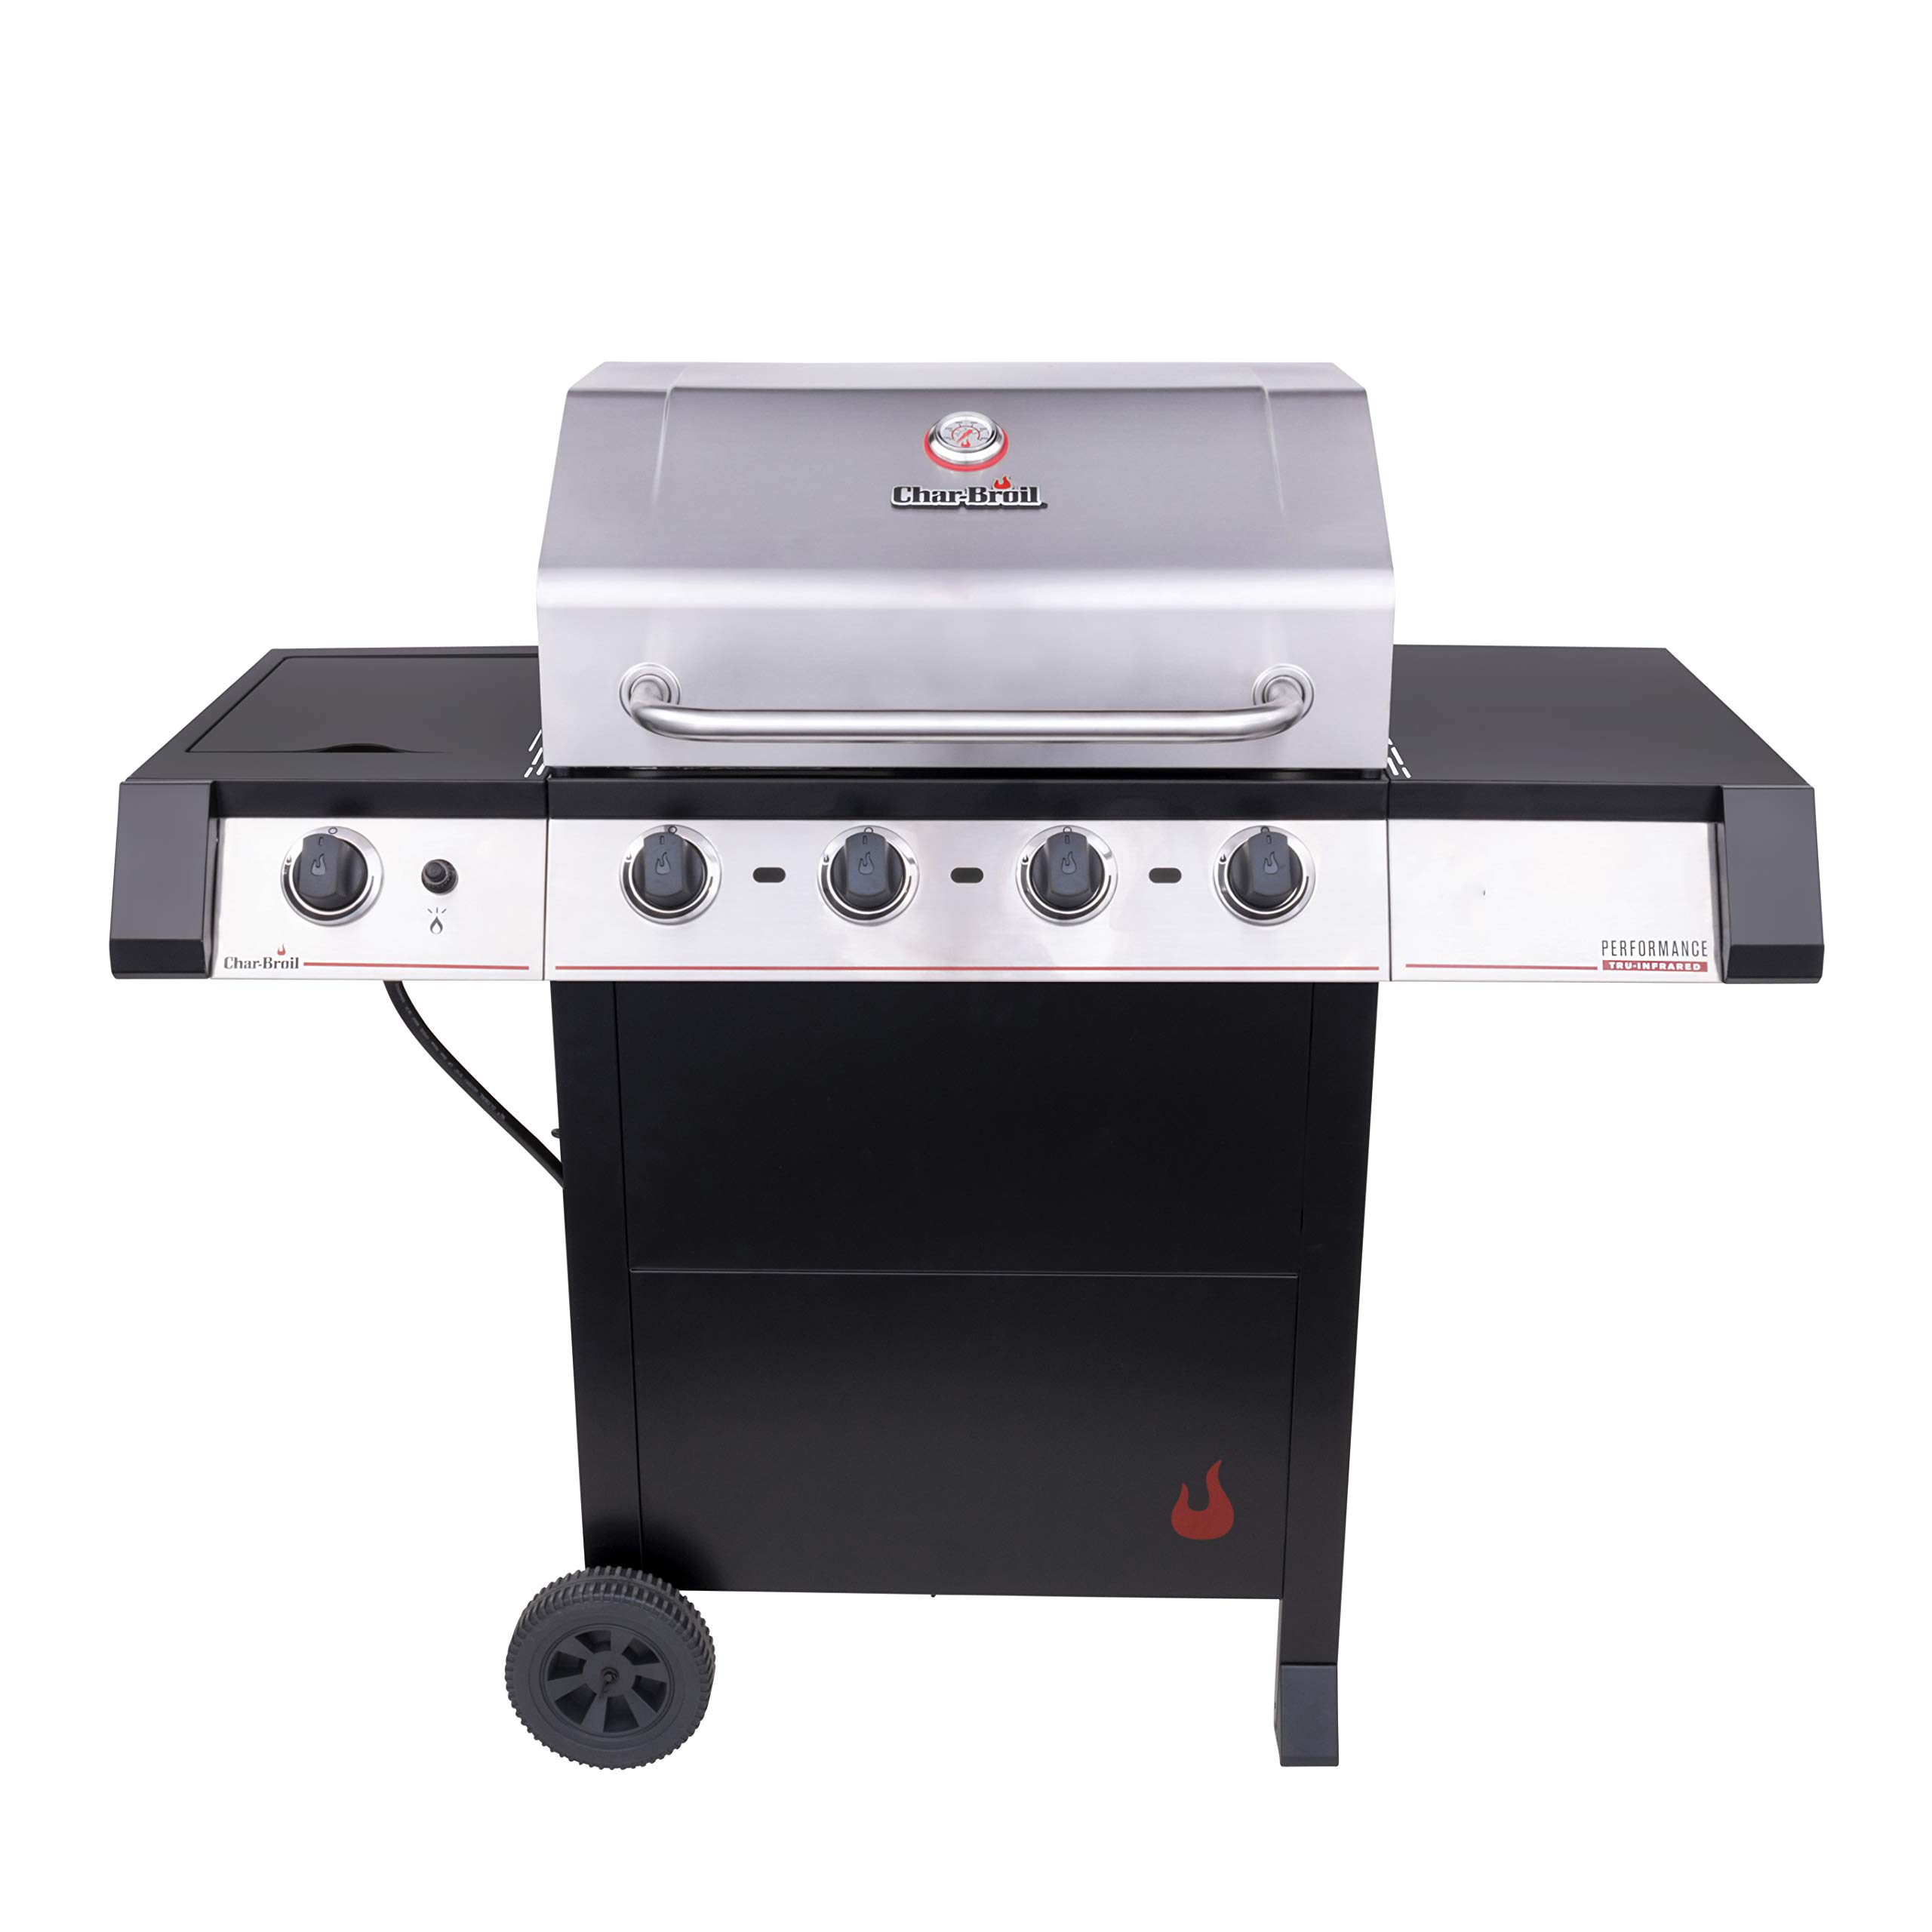 Char-Broil Performance Series Amplifire Infrared Technology 4-Burner with Side Burner Cart Propane Gas Stainless Steel Grill - 463331021